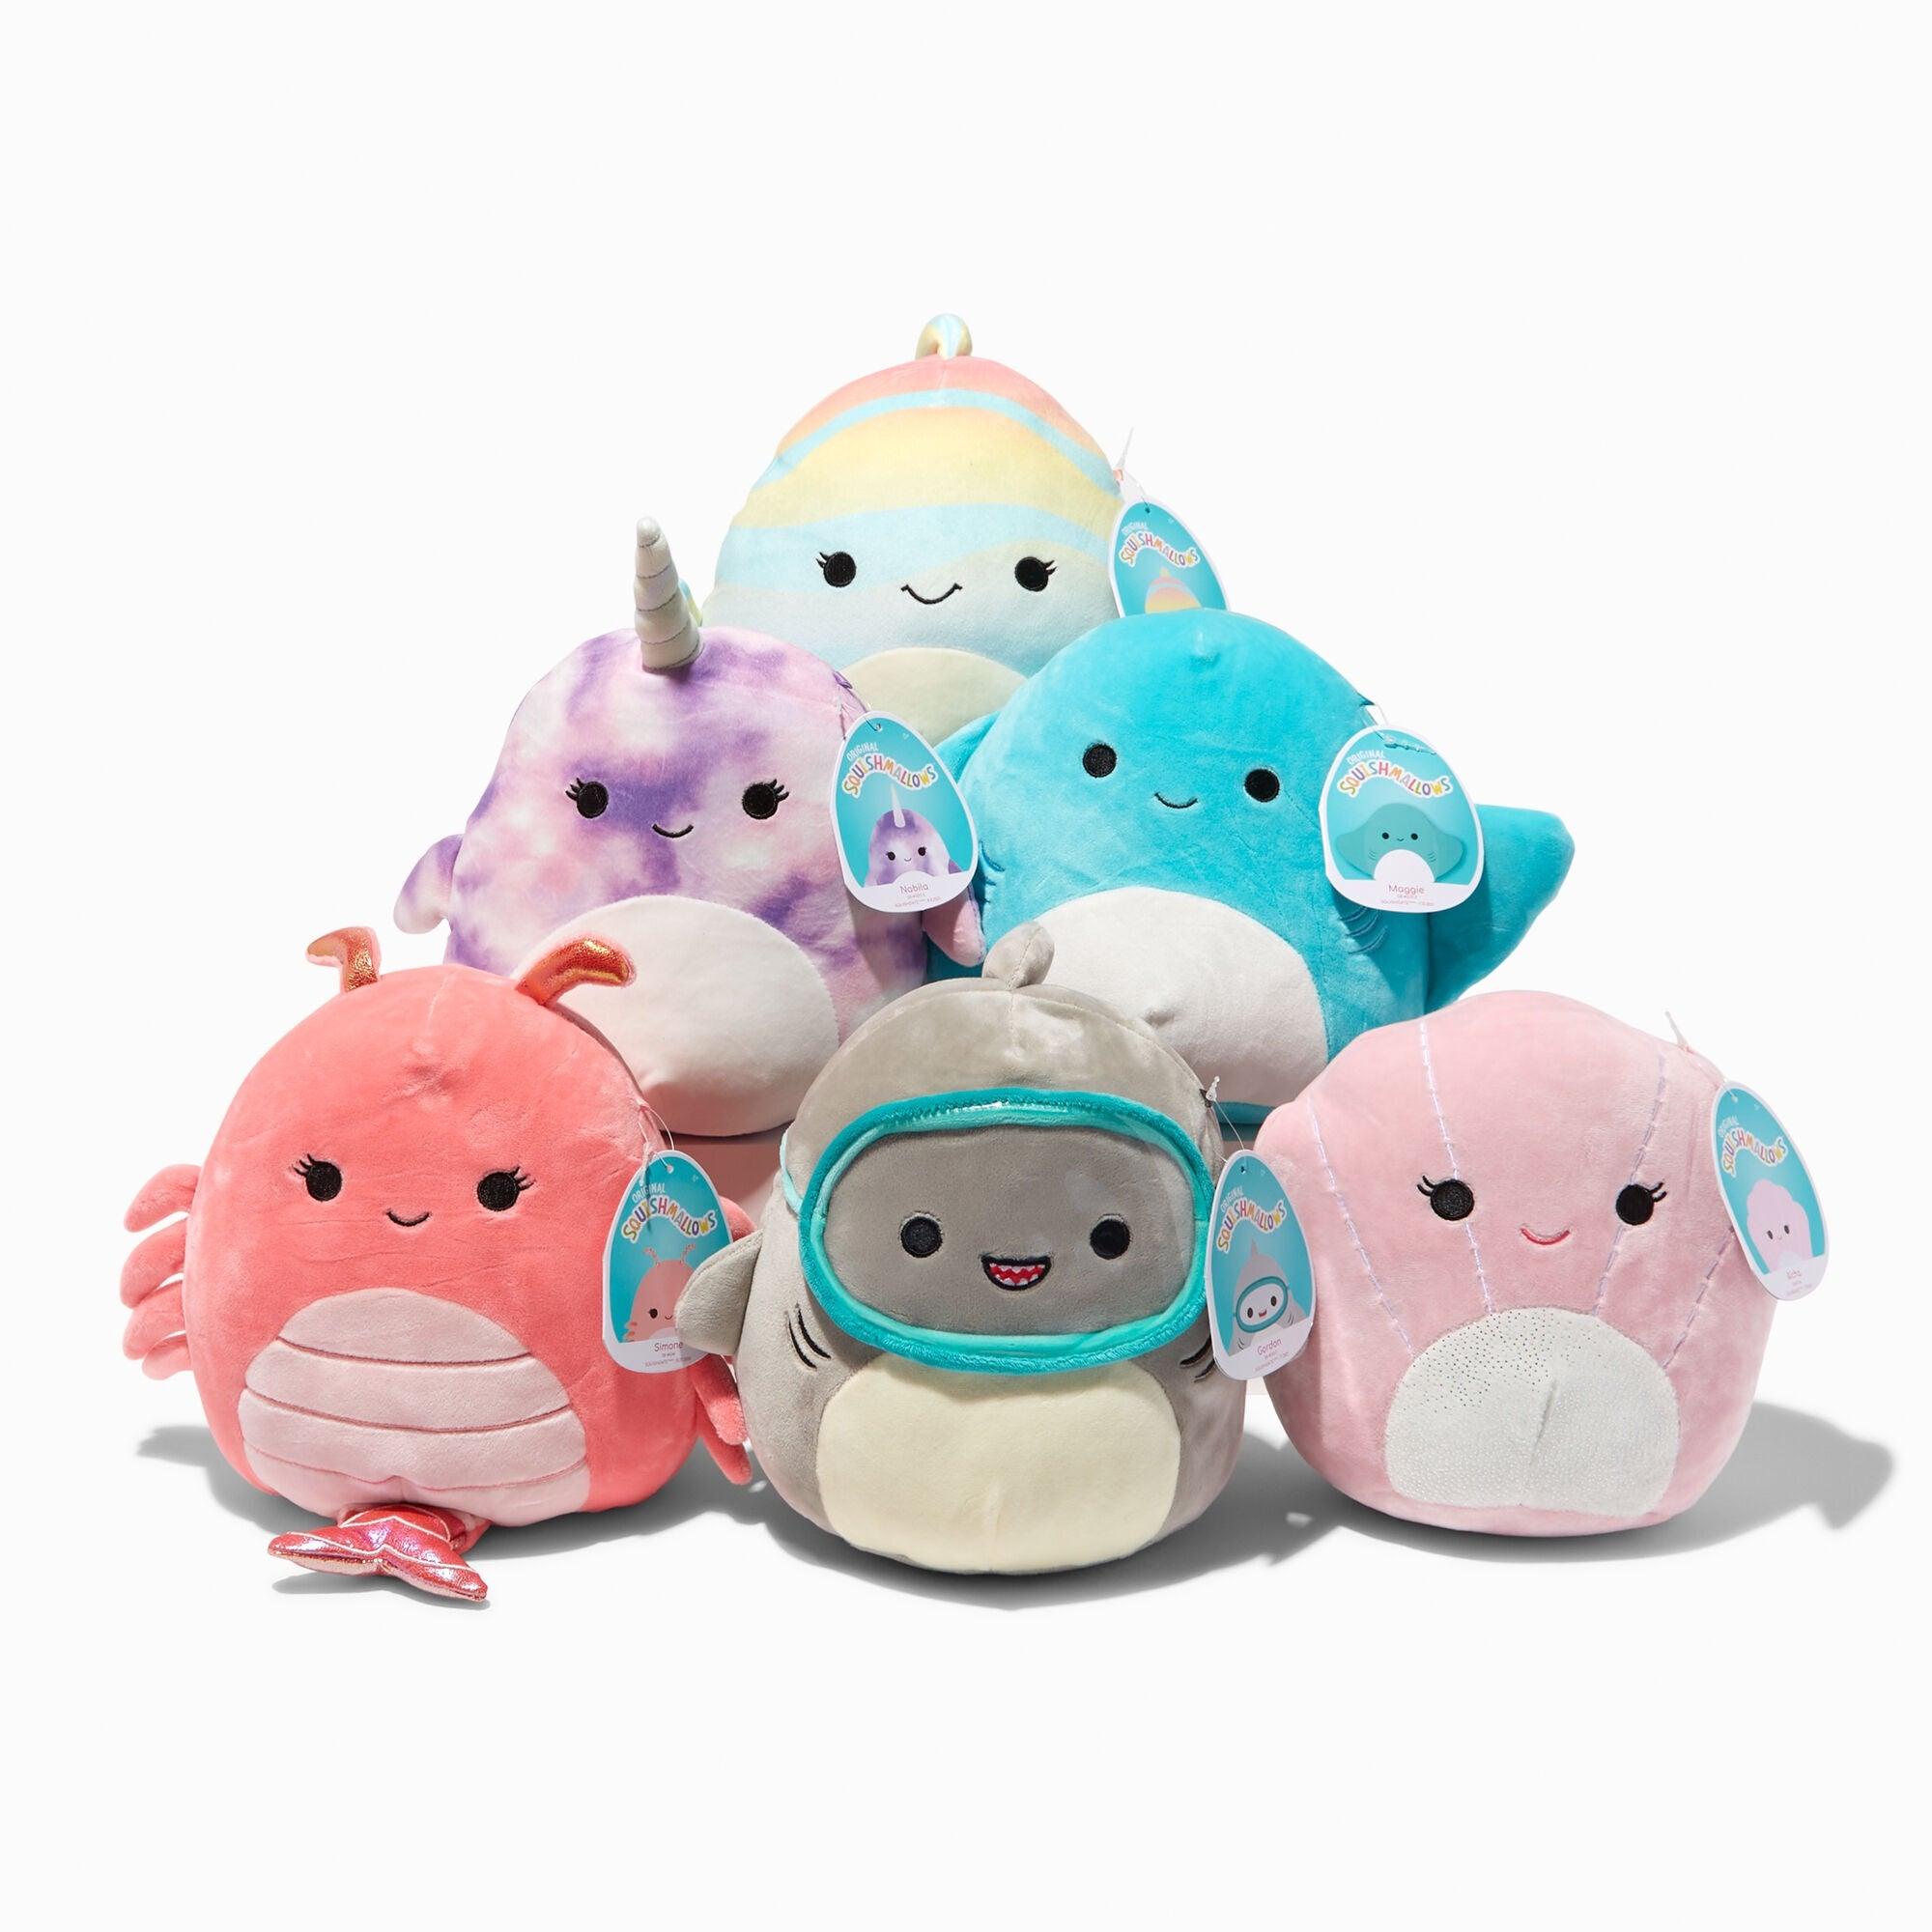 Stitch Squishmallow - 12, Hallmark Awesome Gifts